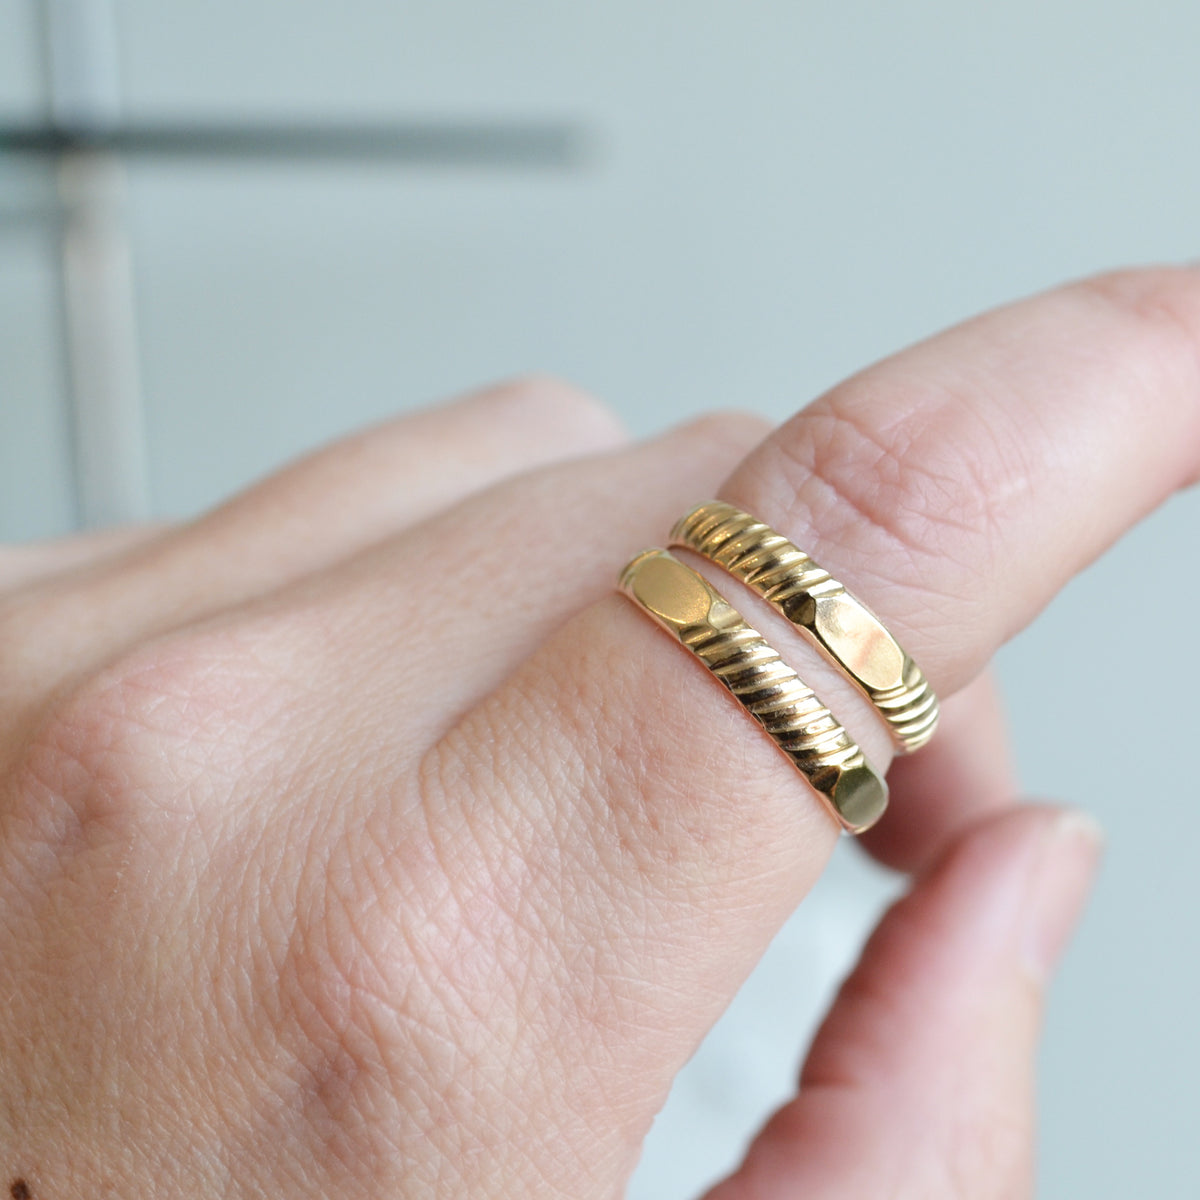 Textured Band Ring, Gold